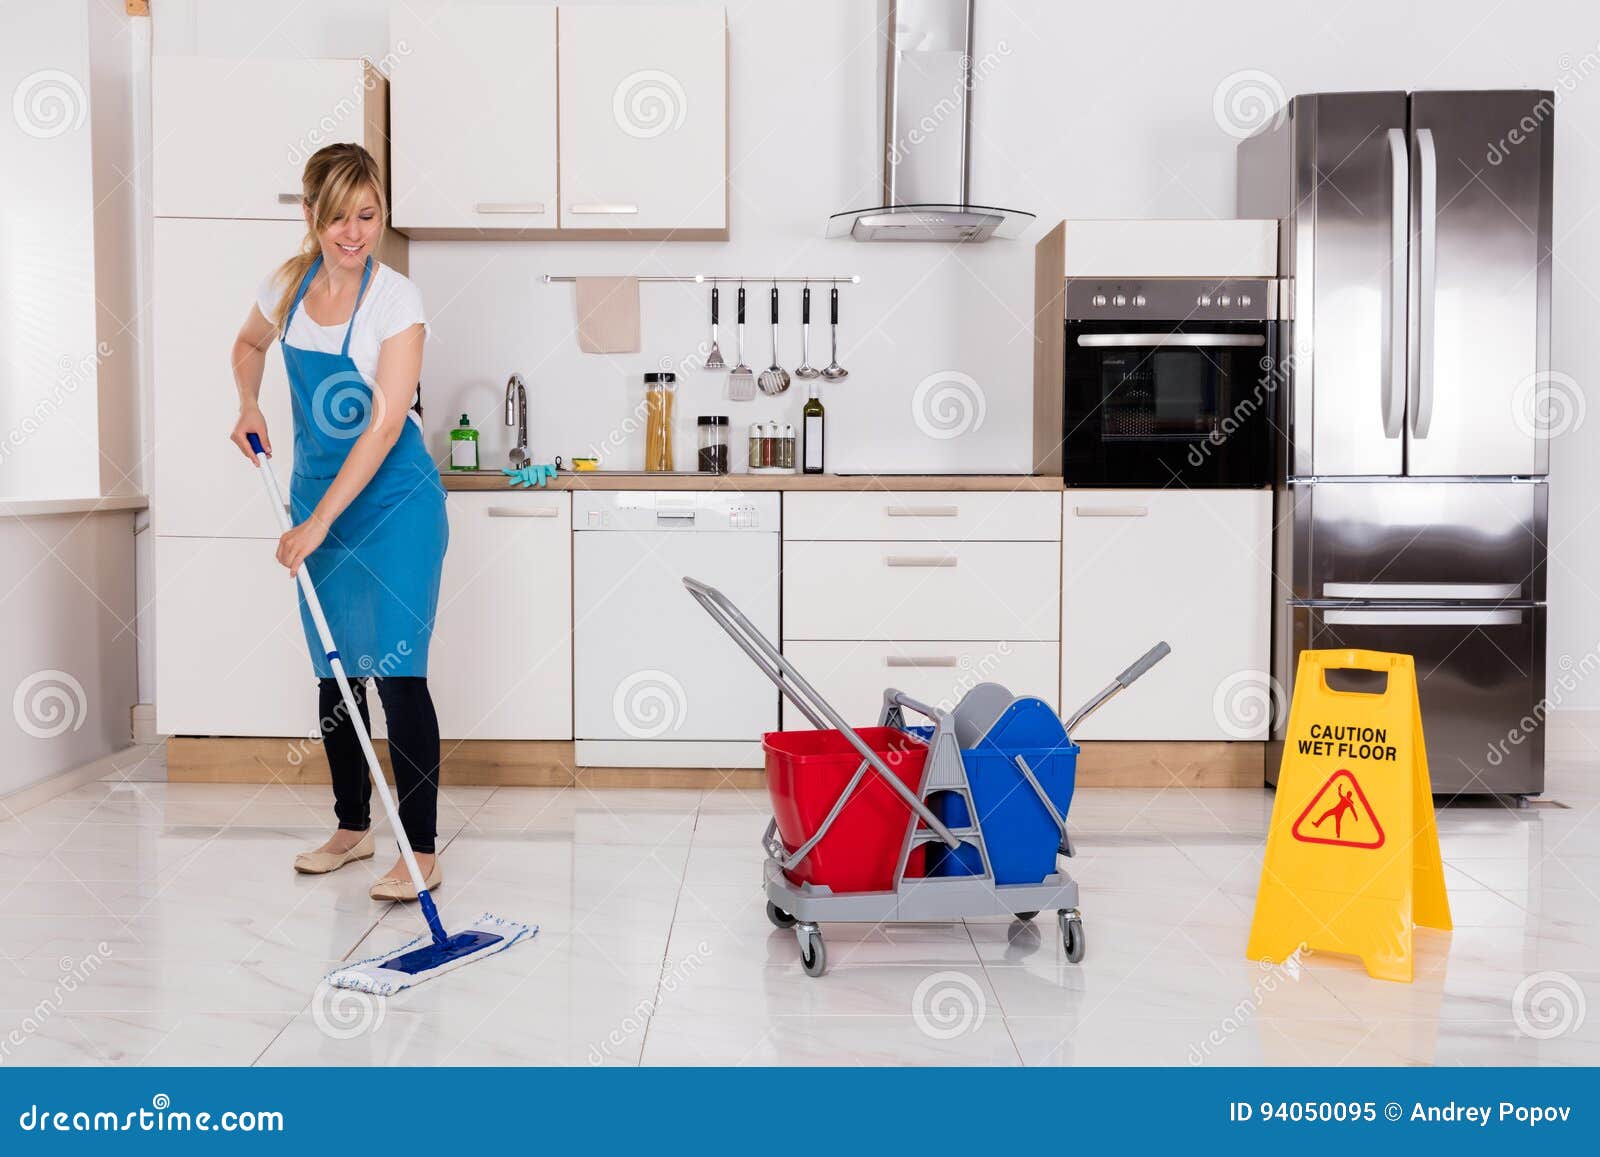 woman cleaning kitchen floor with mop stock image - image of apron